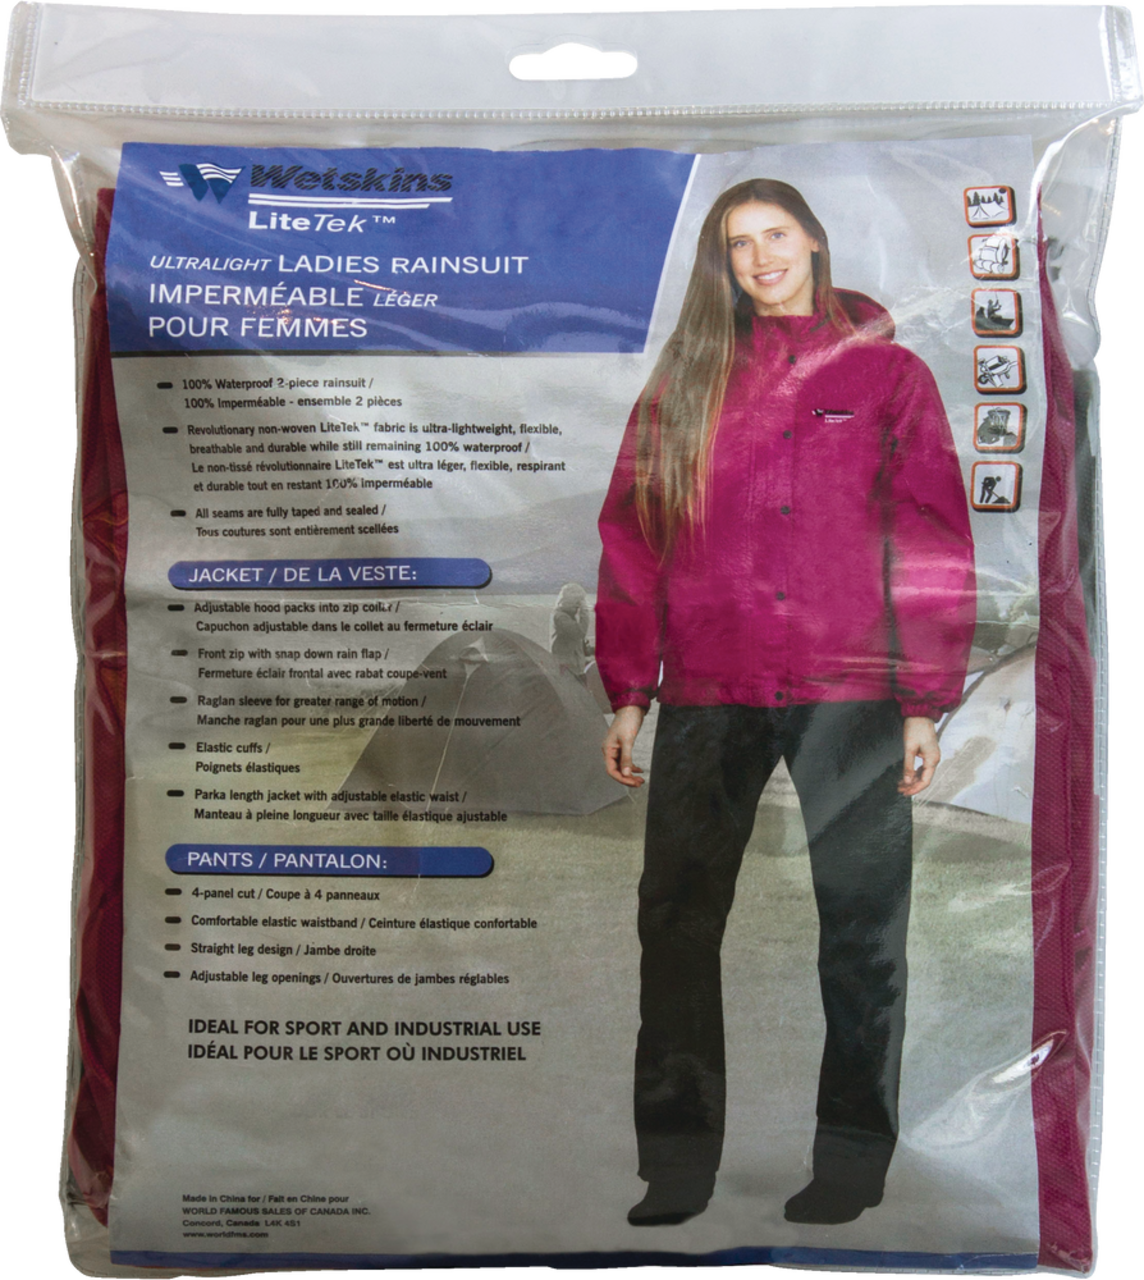 https://media-www.canadiantire.ca/product/playing/footwear-apparel/summer-footwear-apparel/1872275/wetskins-women-s-ultralight-2pc-rainsuit-pink-s-ae45235b-ad23-4dc4-9f91-dd41e0e94799.png?imdensity=1&imwidth=640&impolicy=mZoom